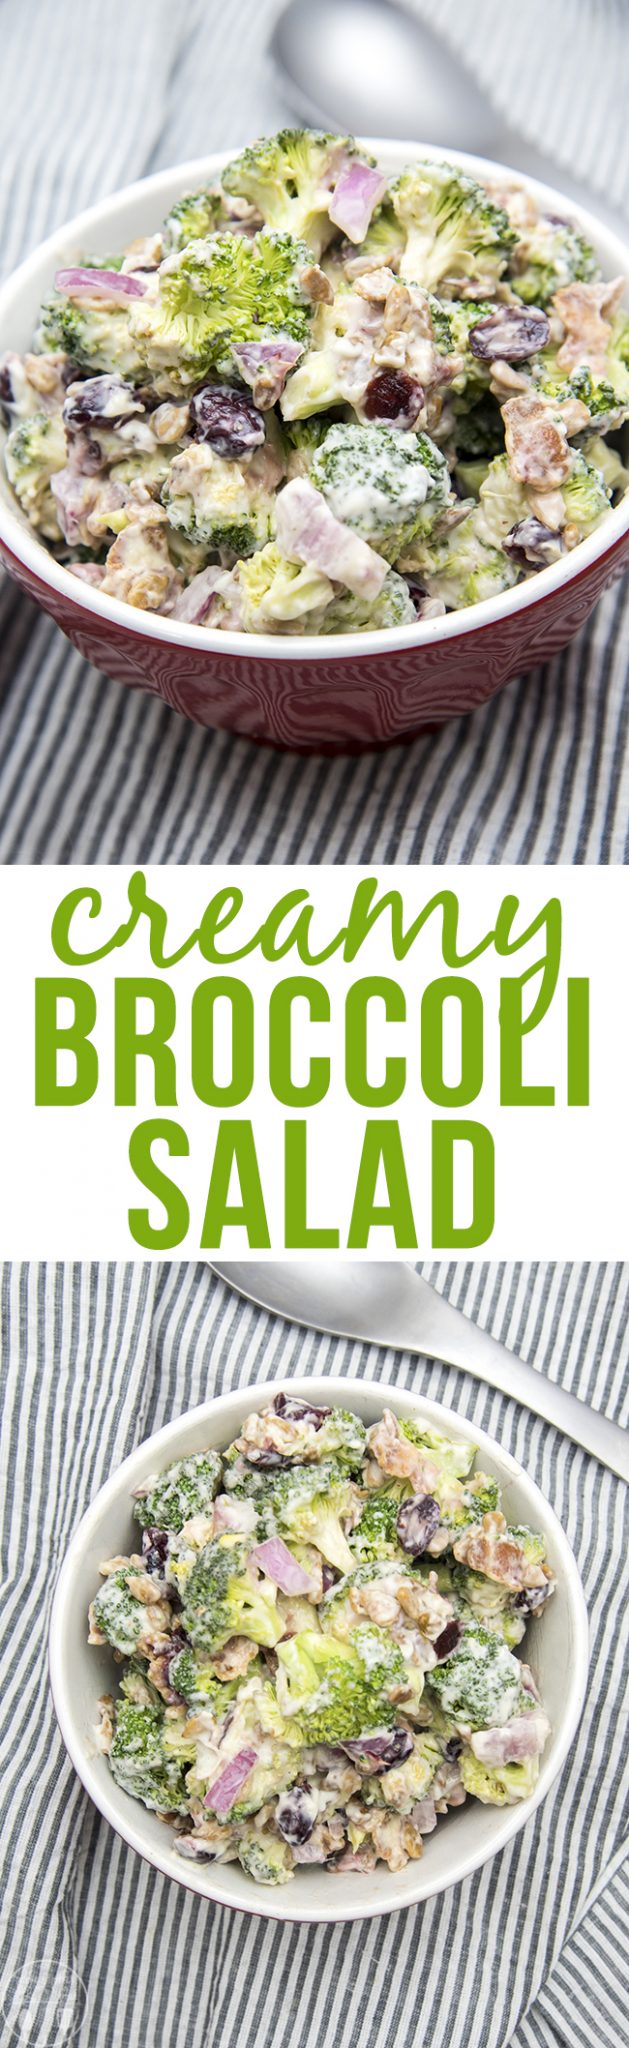 A collage of two photos of broccoli salad with text in between them.